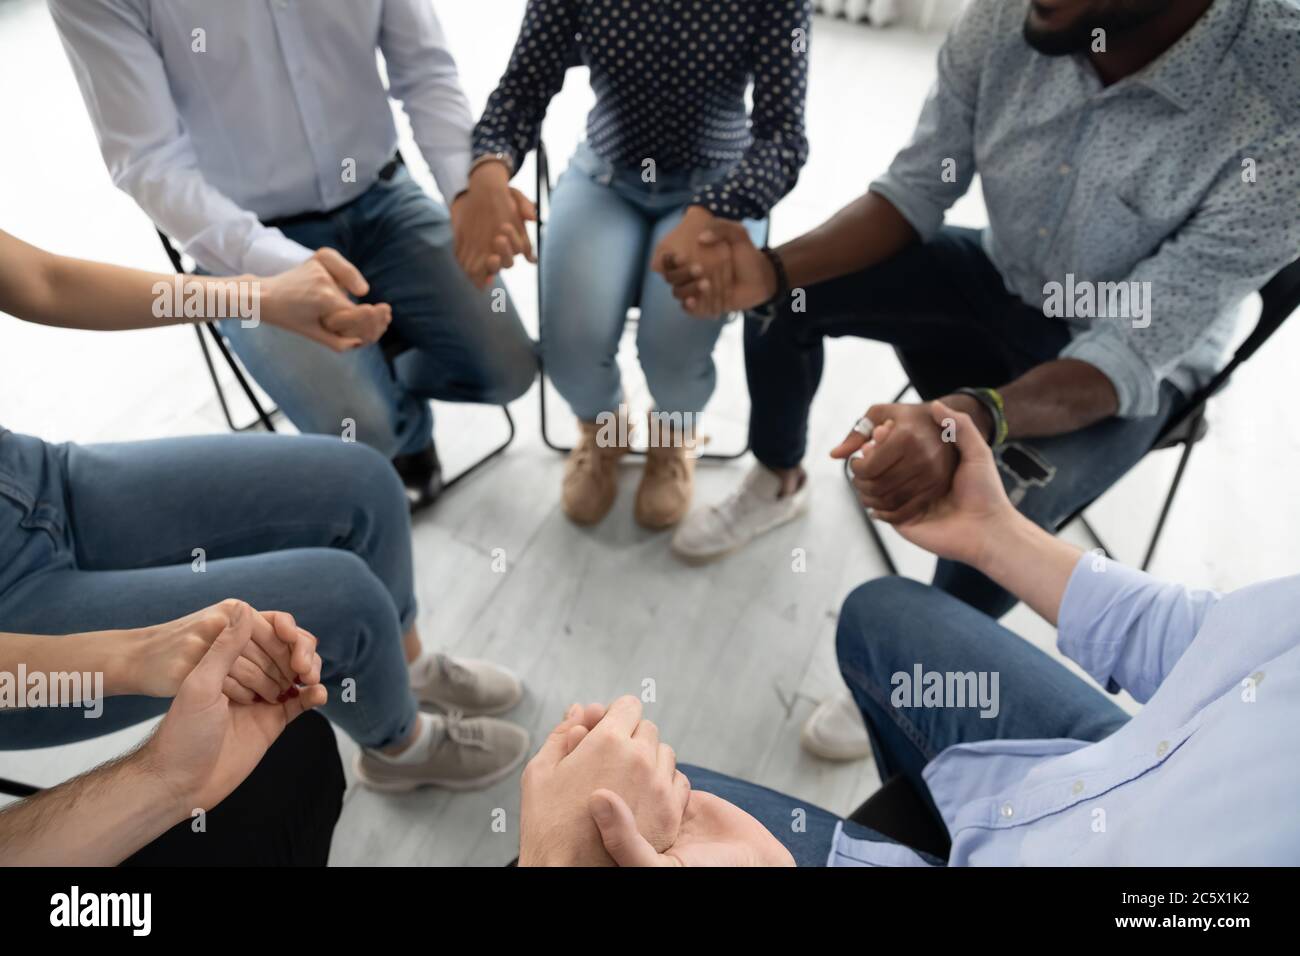 People sitting in circle holding hands involved at group therapy Stock Photo